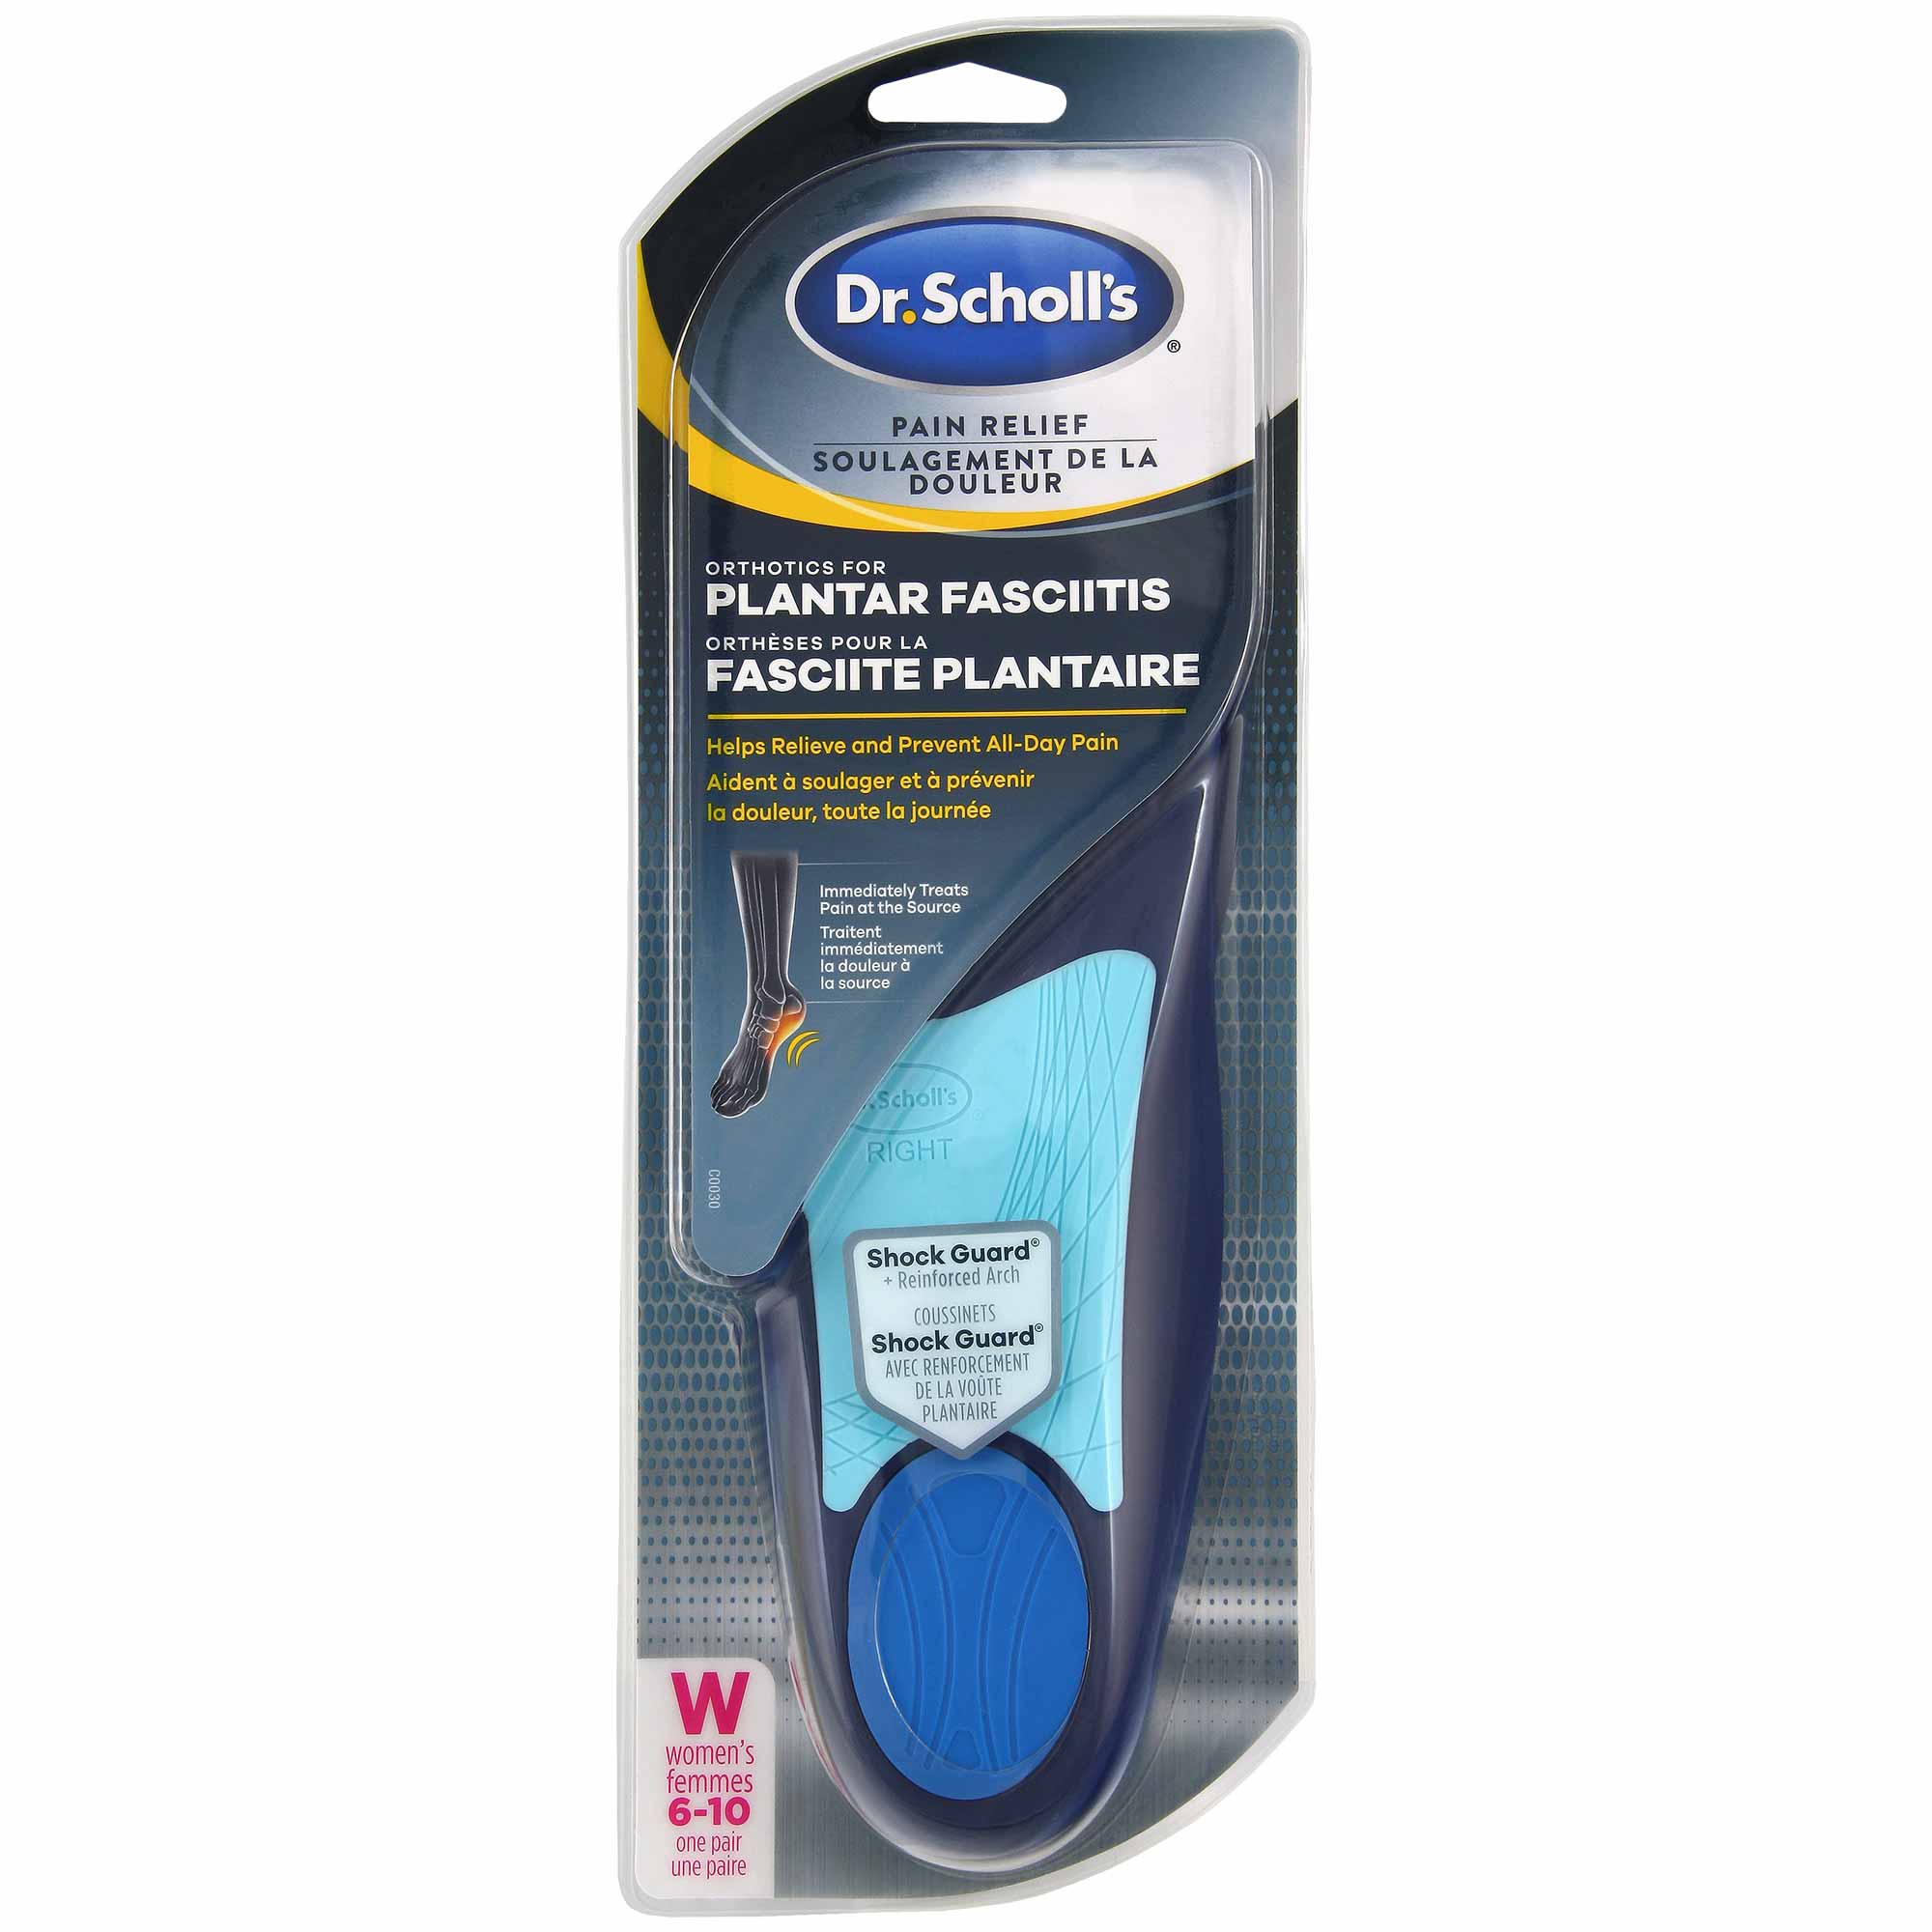 Casual Pain Relief: Insoles for Plantar Fasciitis